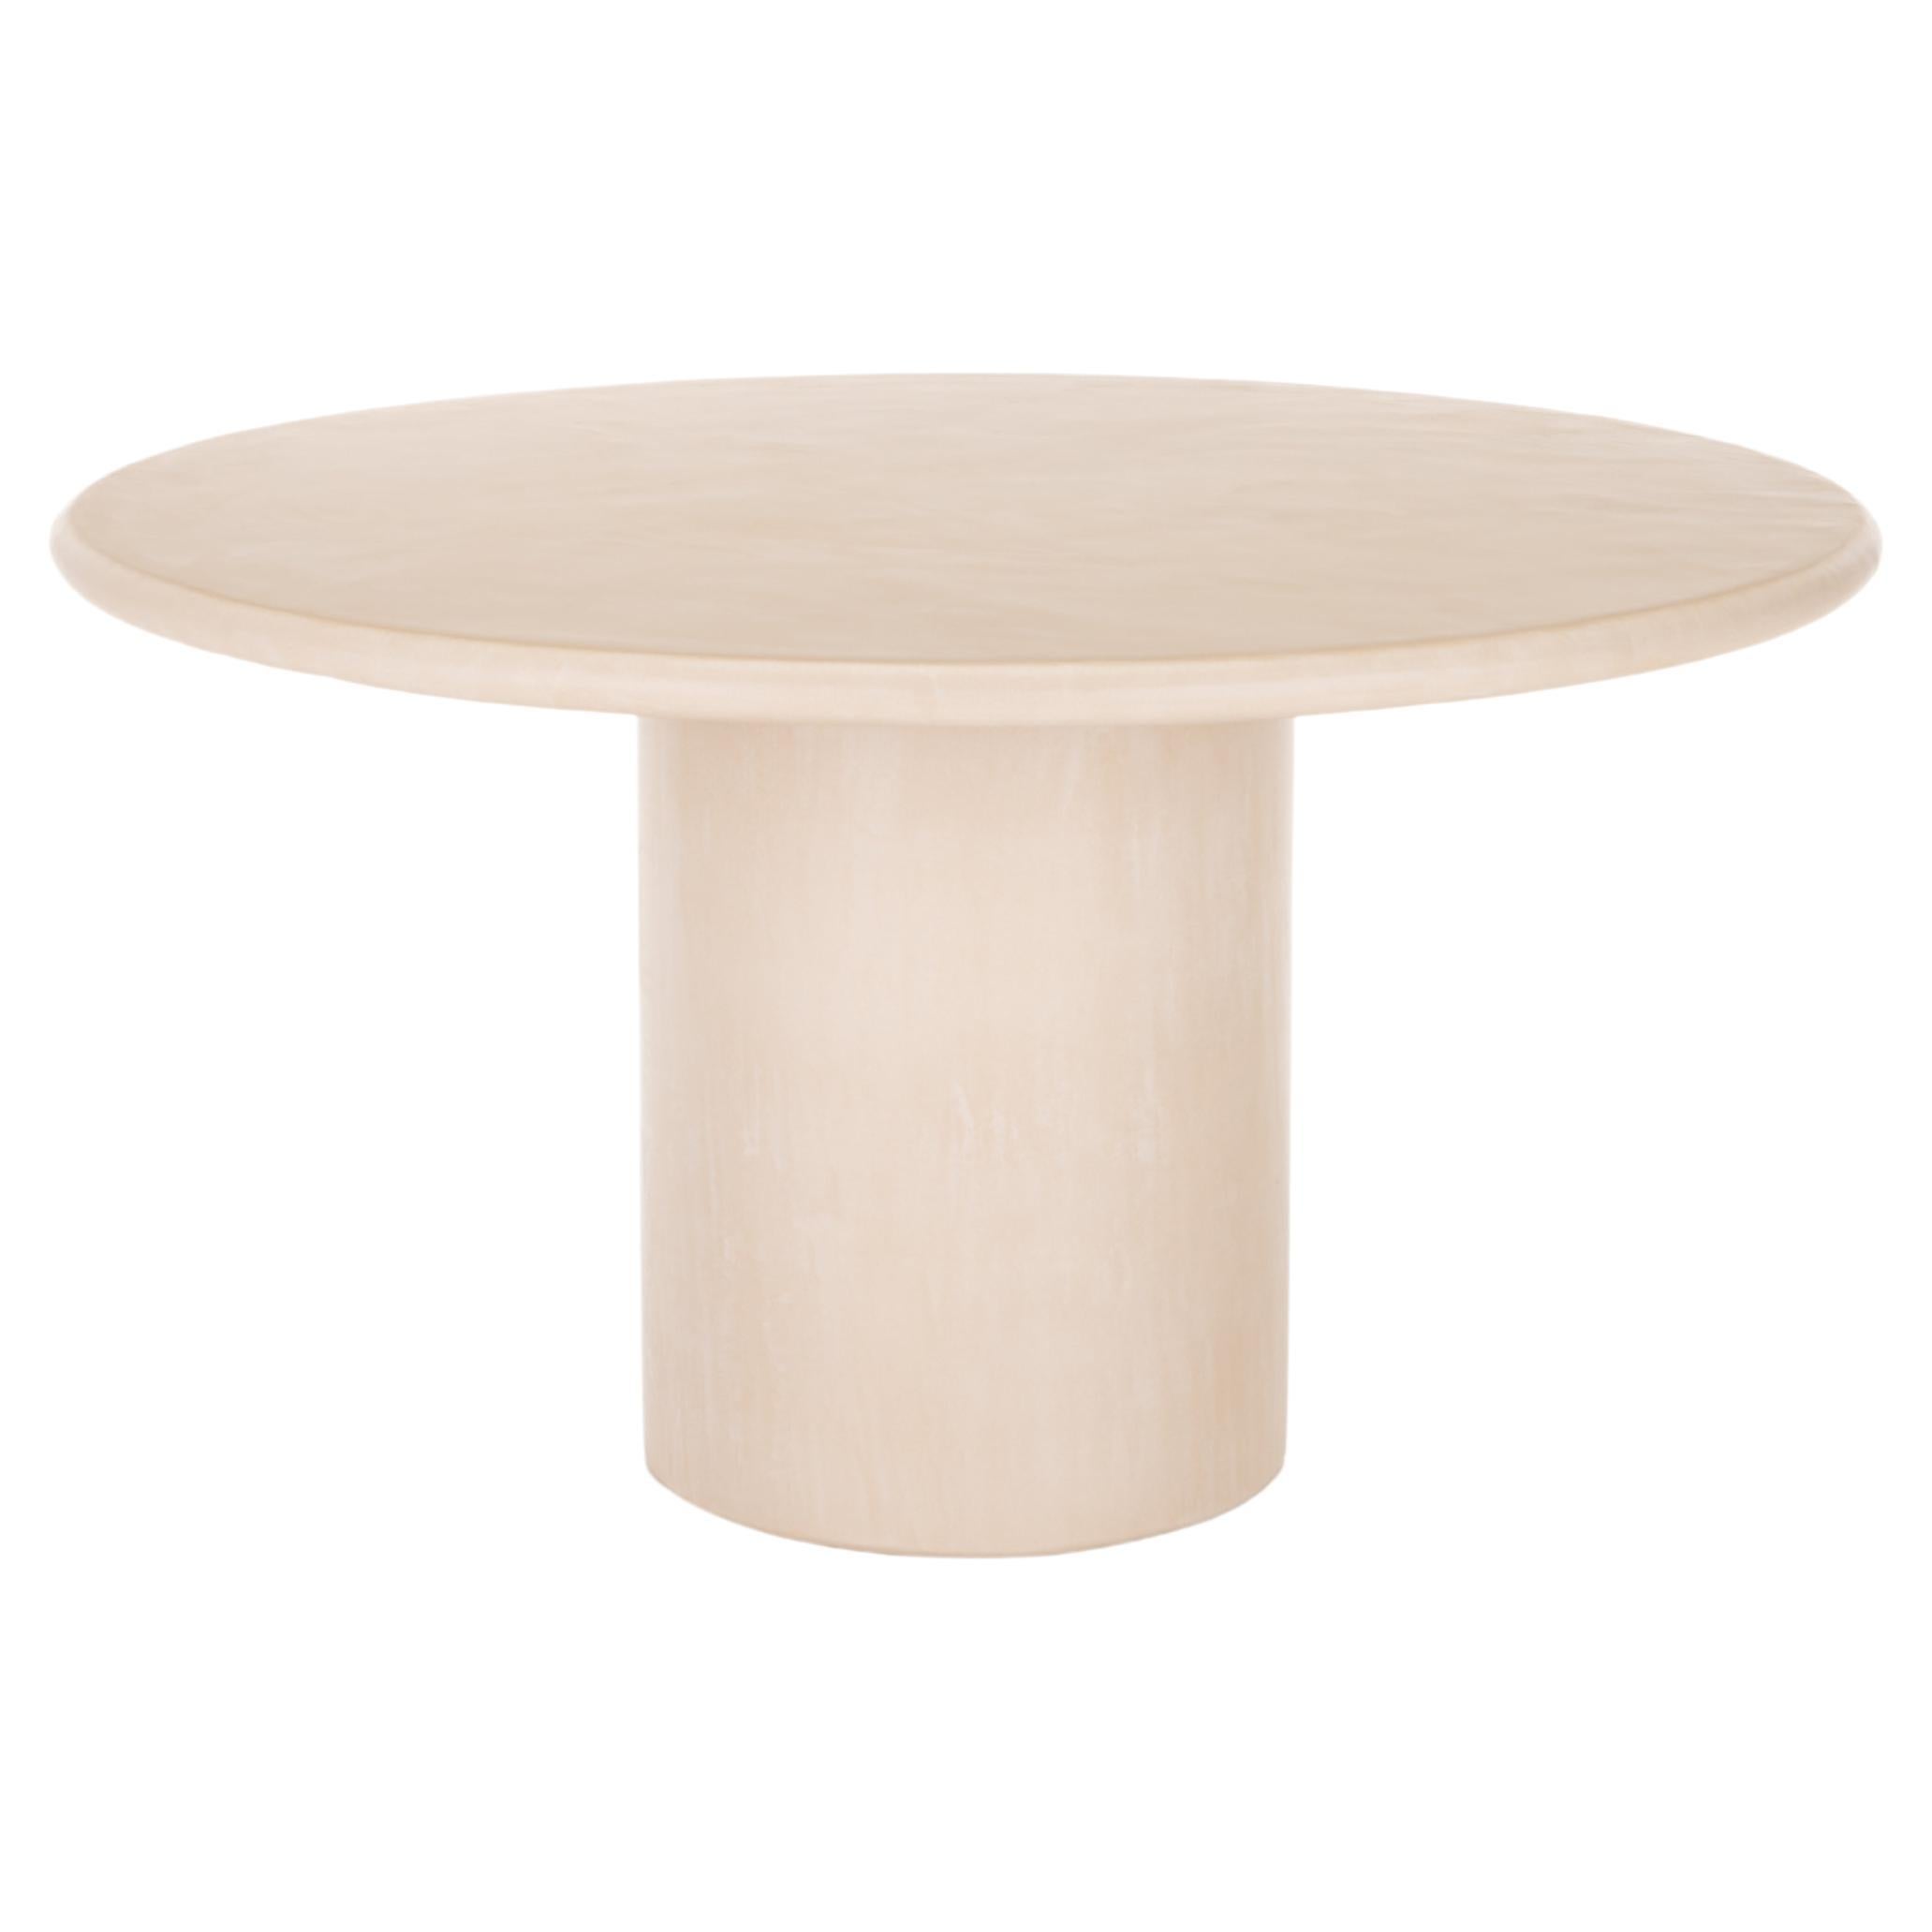 Contemporary Round Natural Plaster "Column" Table 120cm by Isabelle Beaumont For Sale